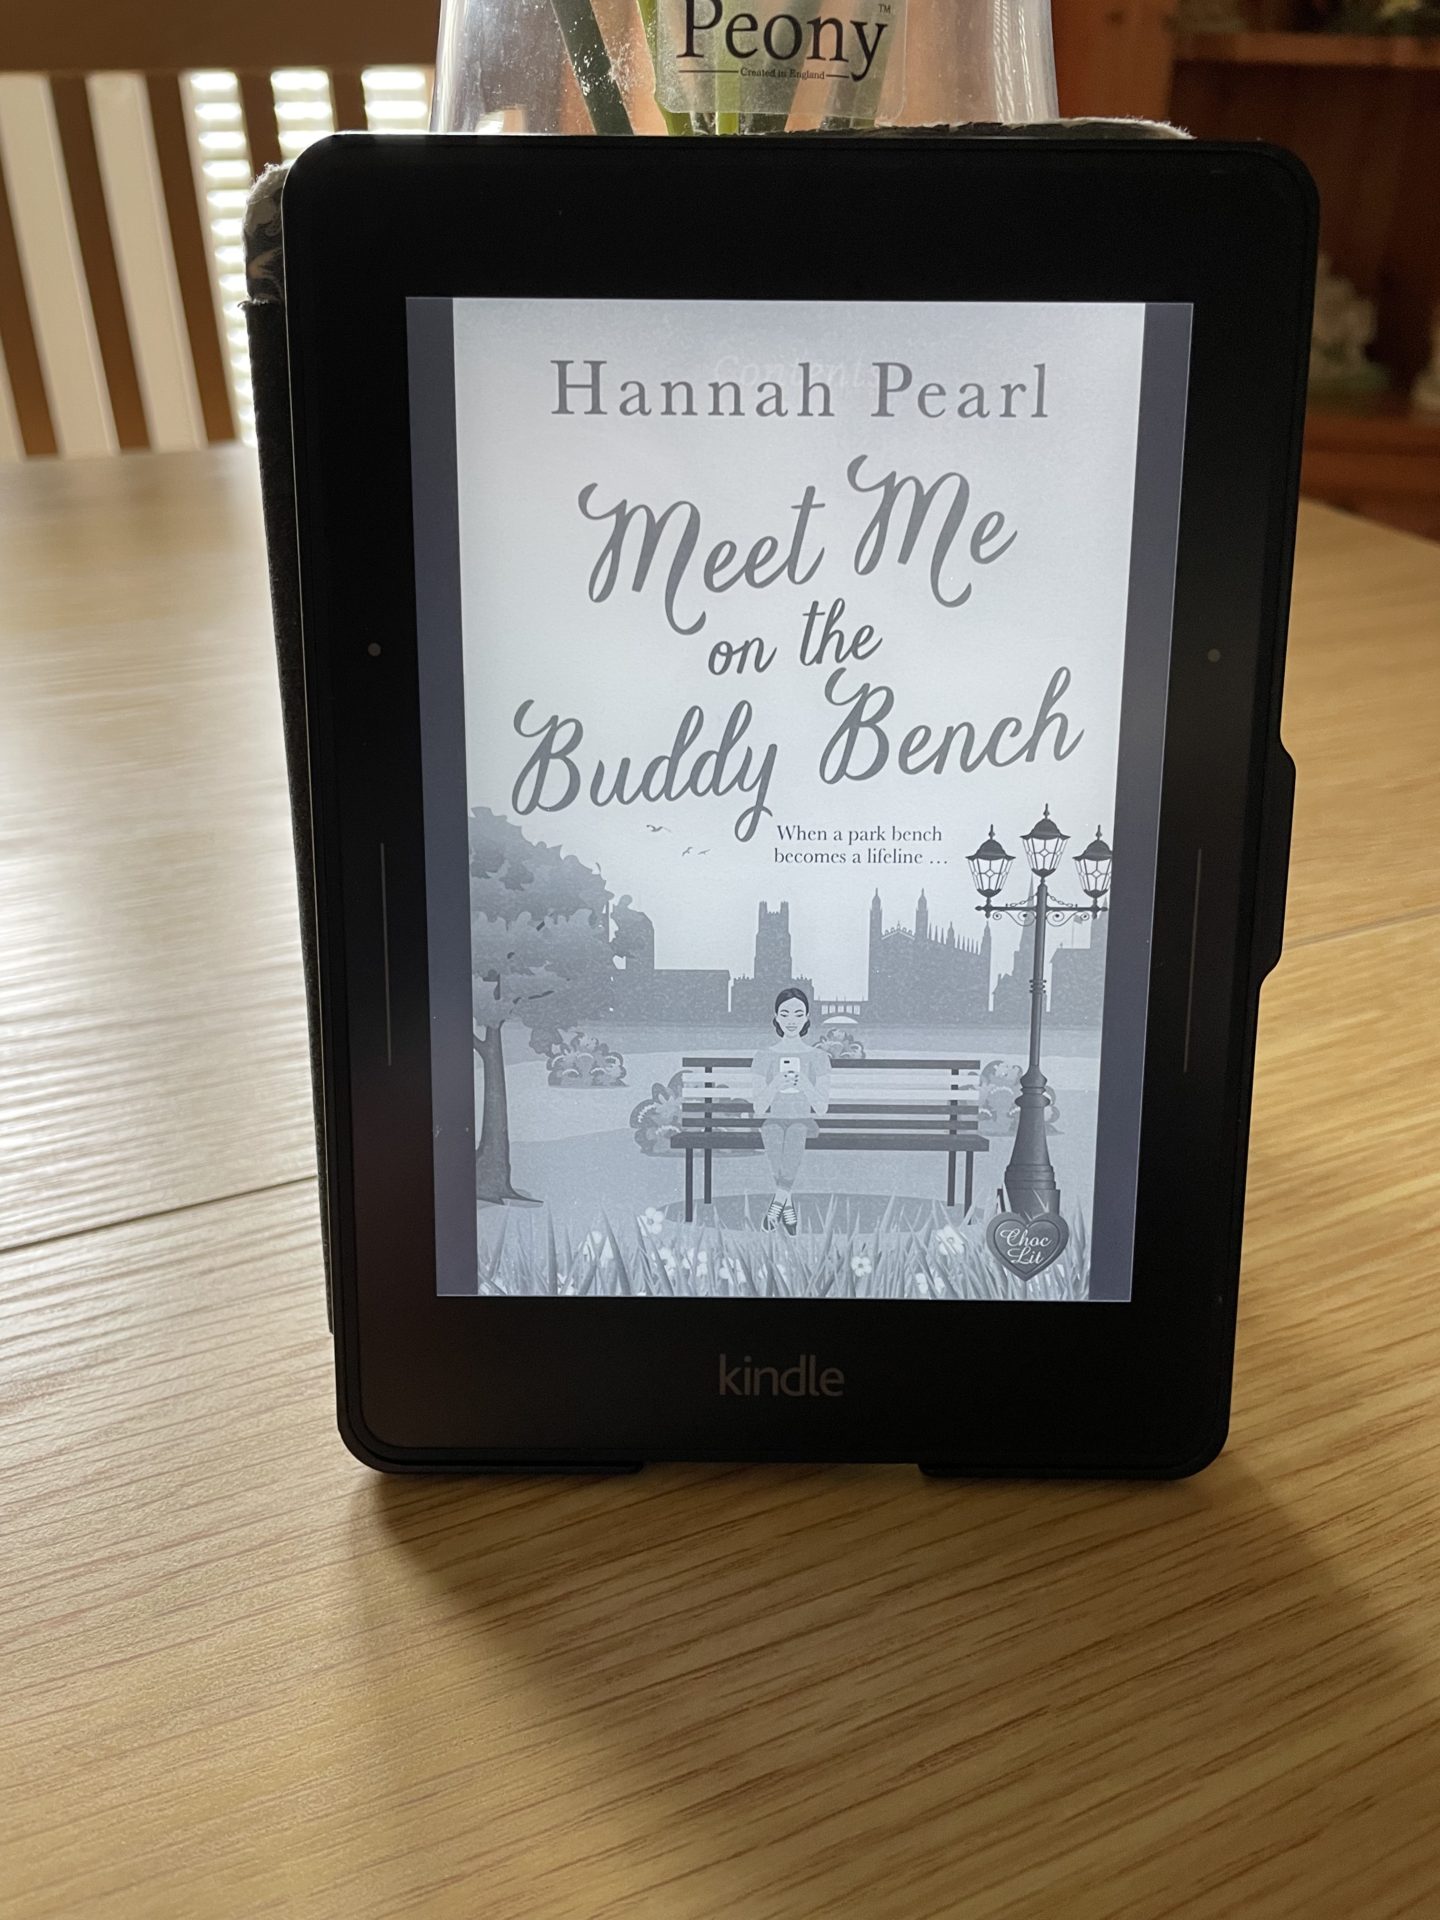 Novel about chronic illness: Meet Me on the Buddy Bench by Hannah Pearl 